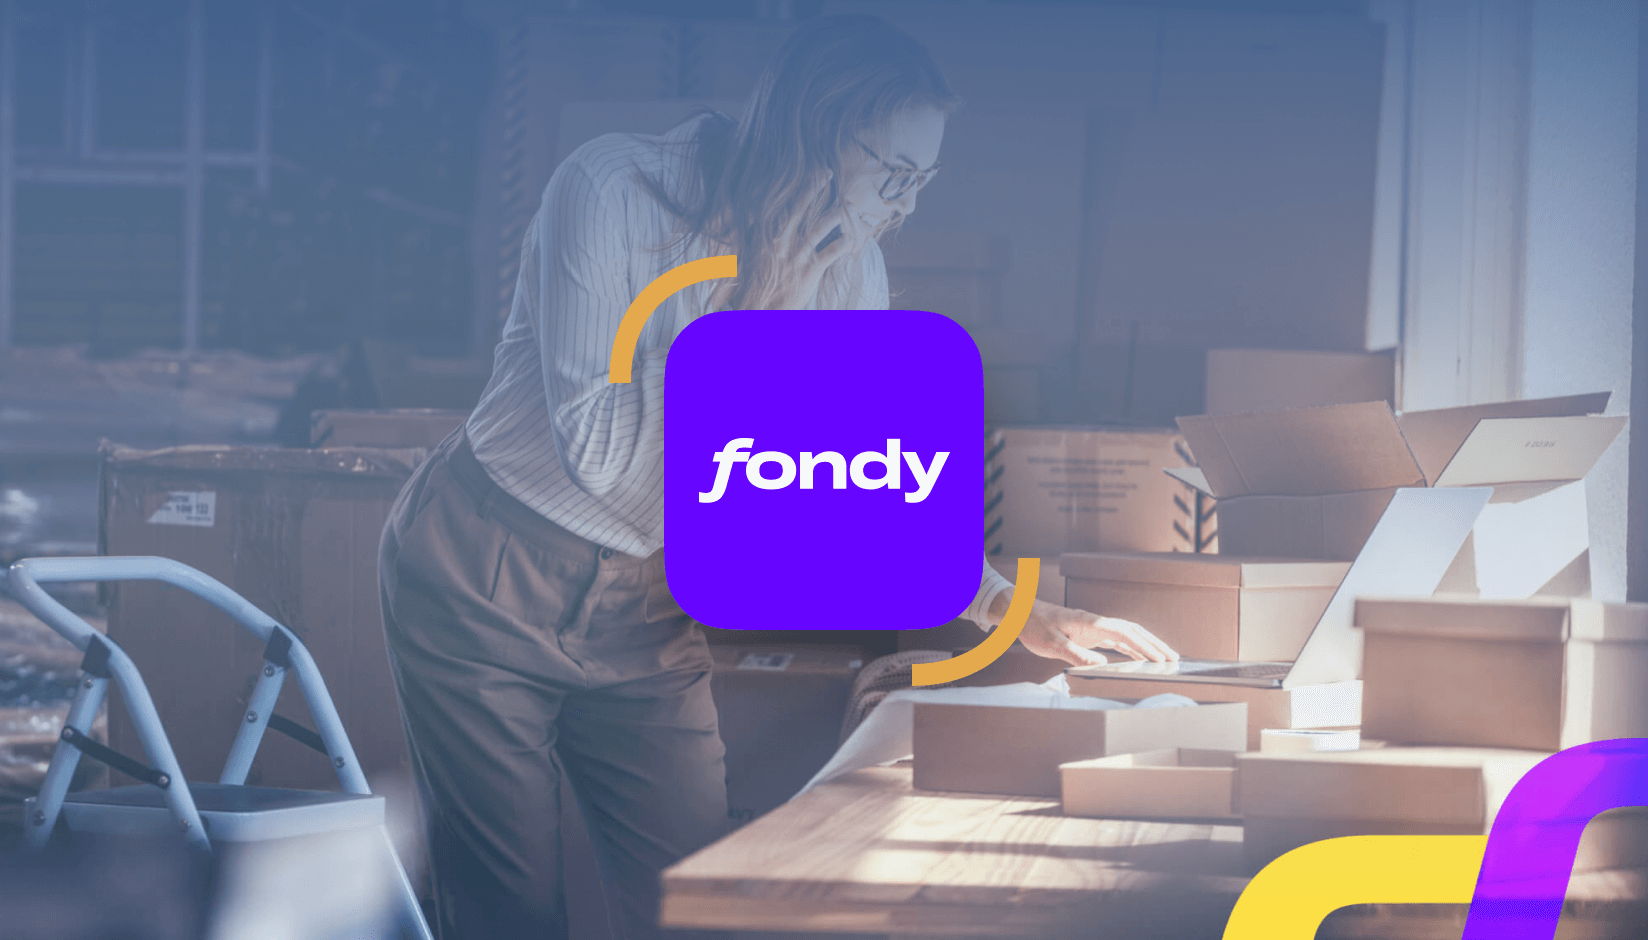 Fondy Is Coming to Coworking Spaces with andcards